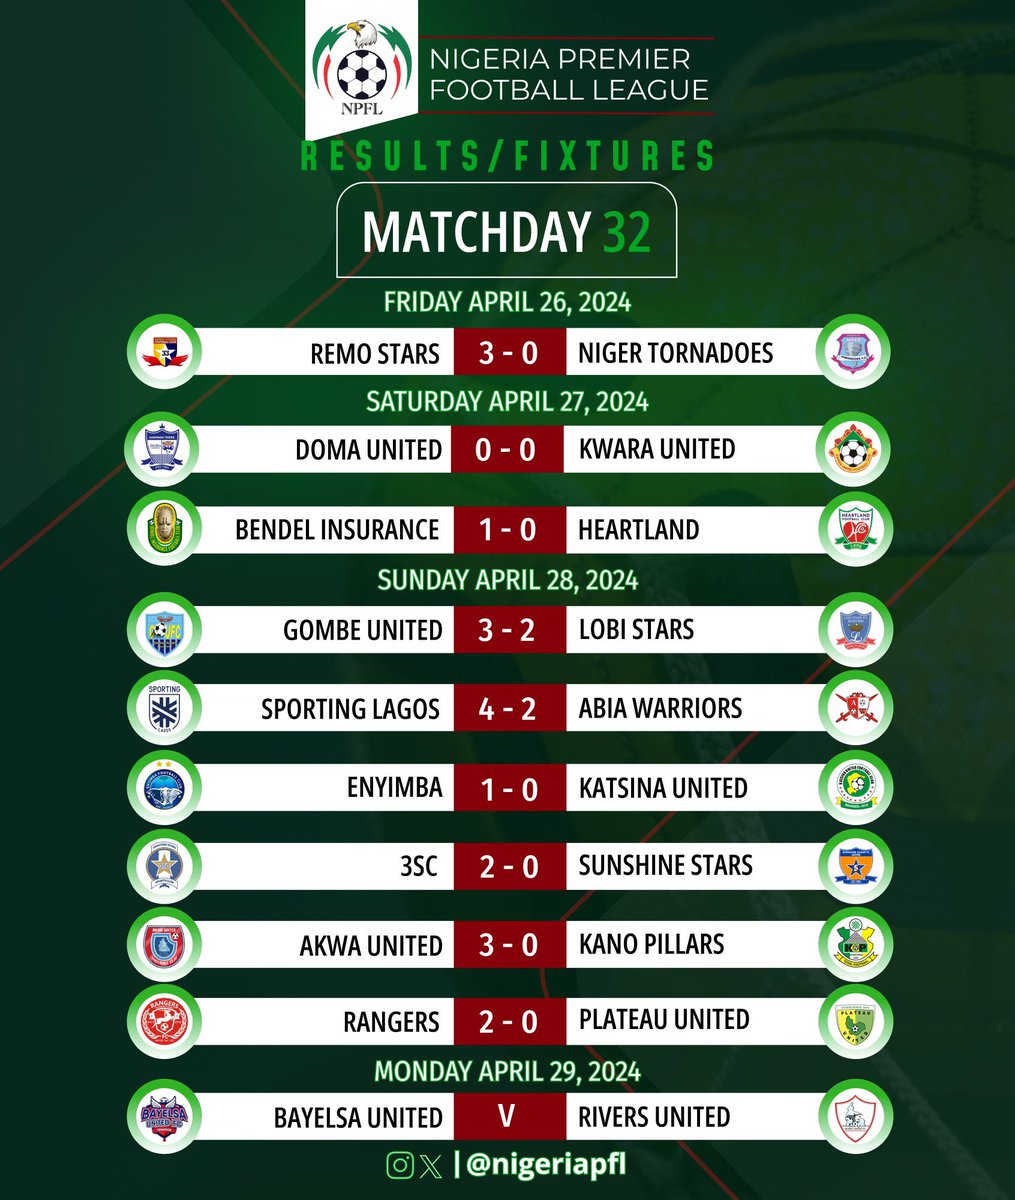 #NPFL 24 MD32 (Day 3); 🔹Dark skies for Sunshine Stars in IB as 3SC claimed bragging rights. 🔹Akwa Utd DECKED Kano Pillars to keep heads above relegation waters. 🔹 Big wins for Remo, Enyimba & Rangers. 🔹 Goal fest in Lagos to usher in the reign of Biffo. #Notimeforsmesme